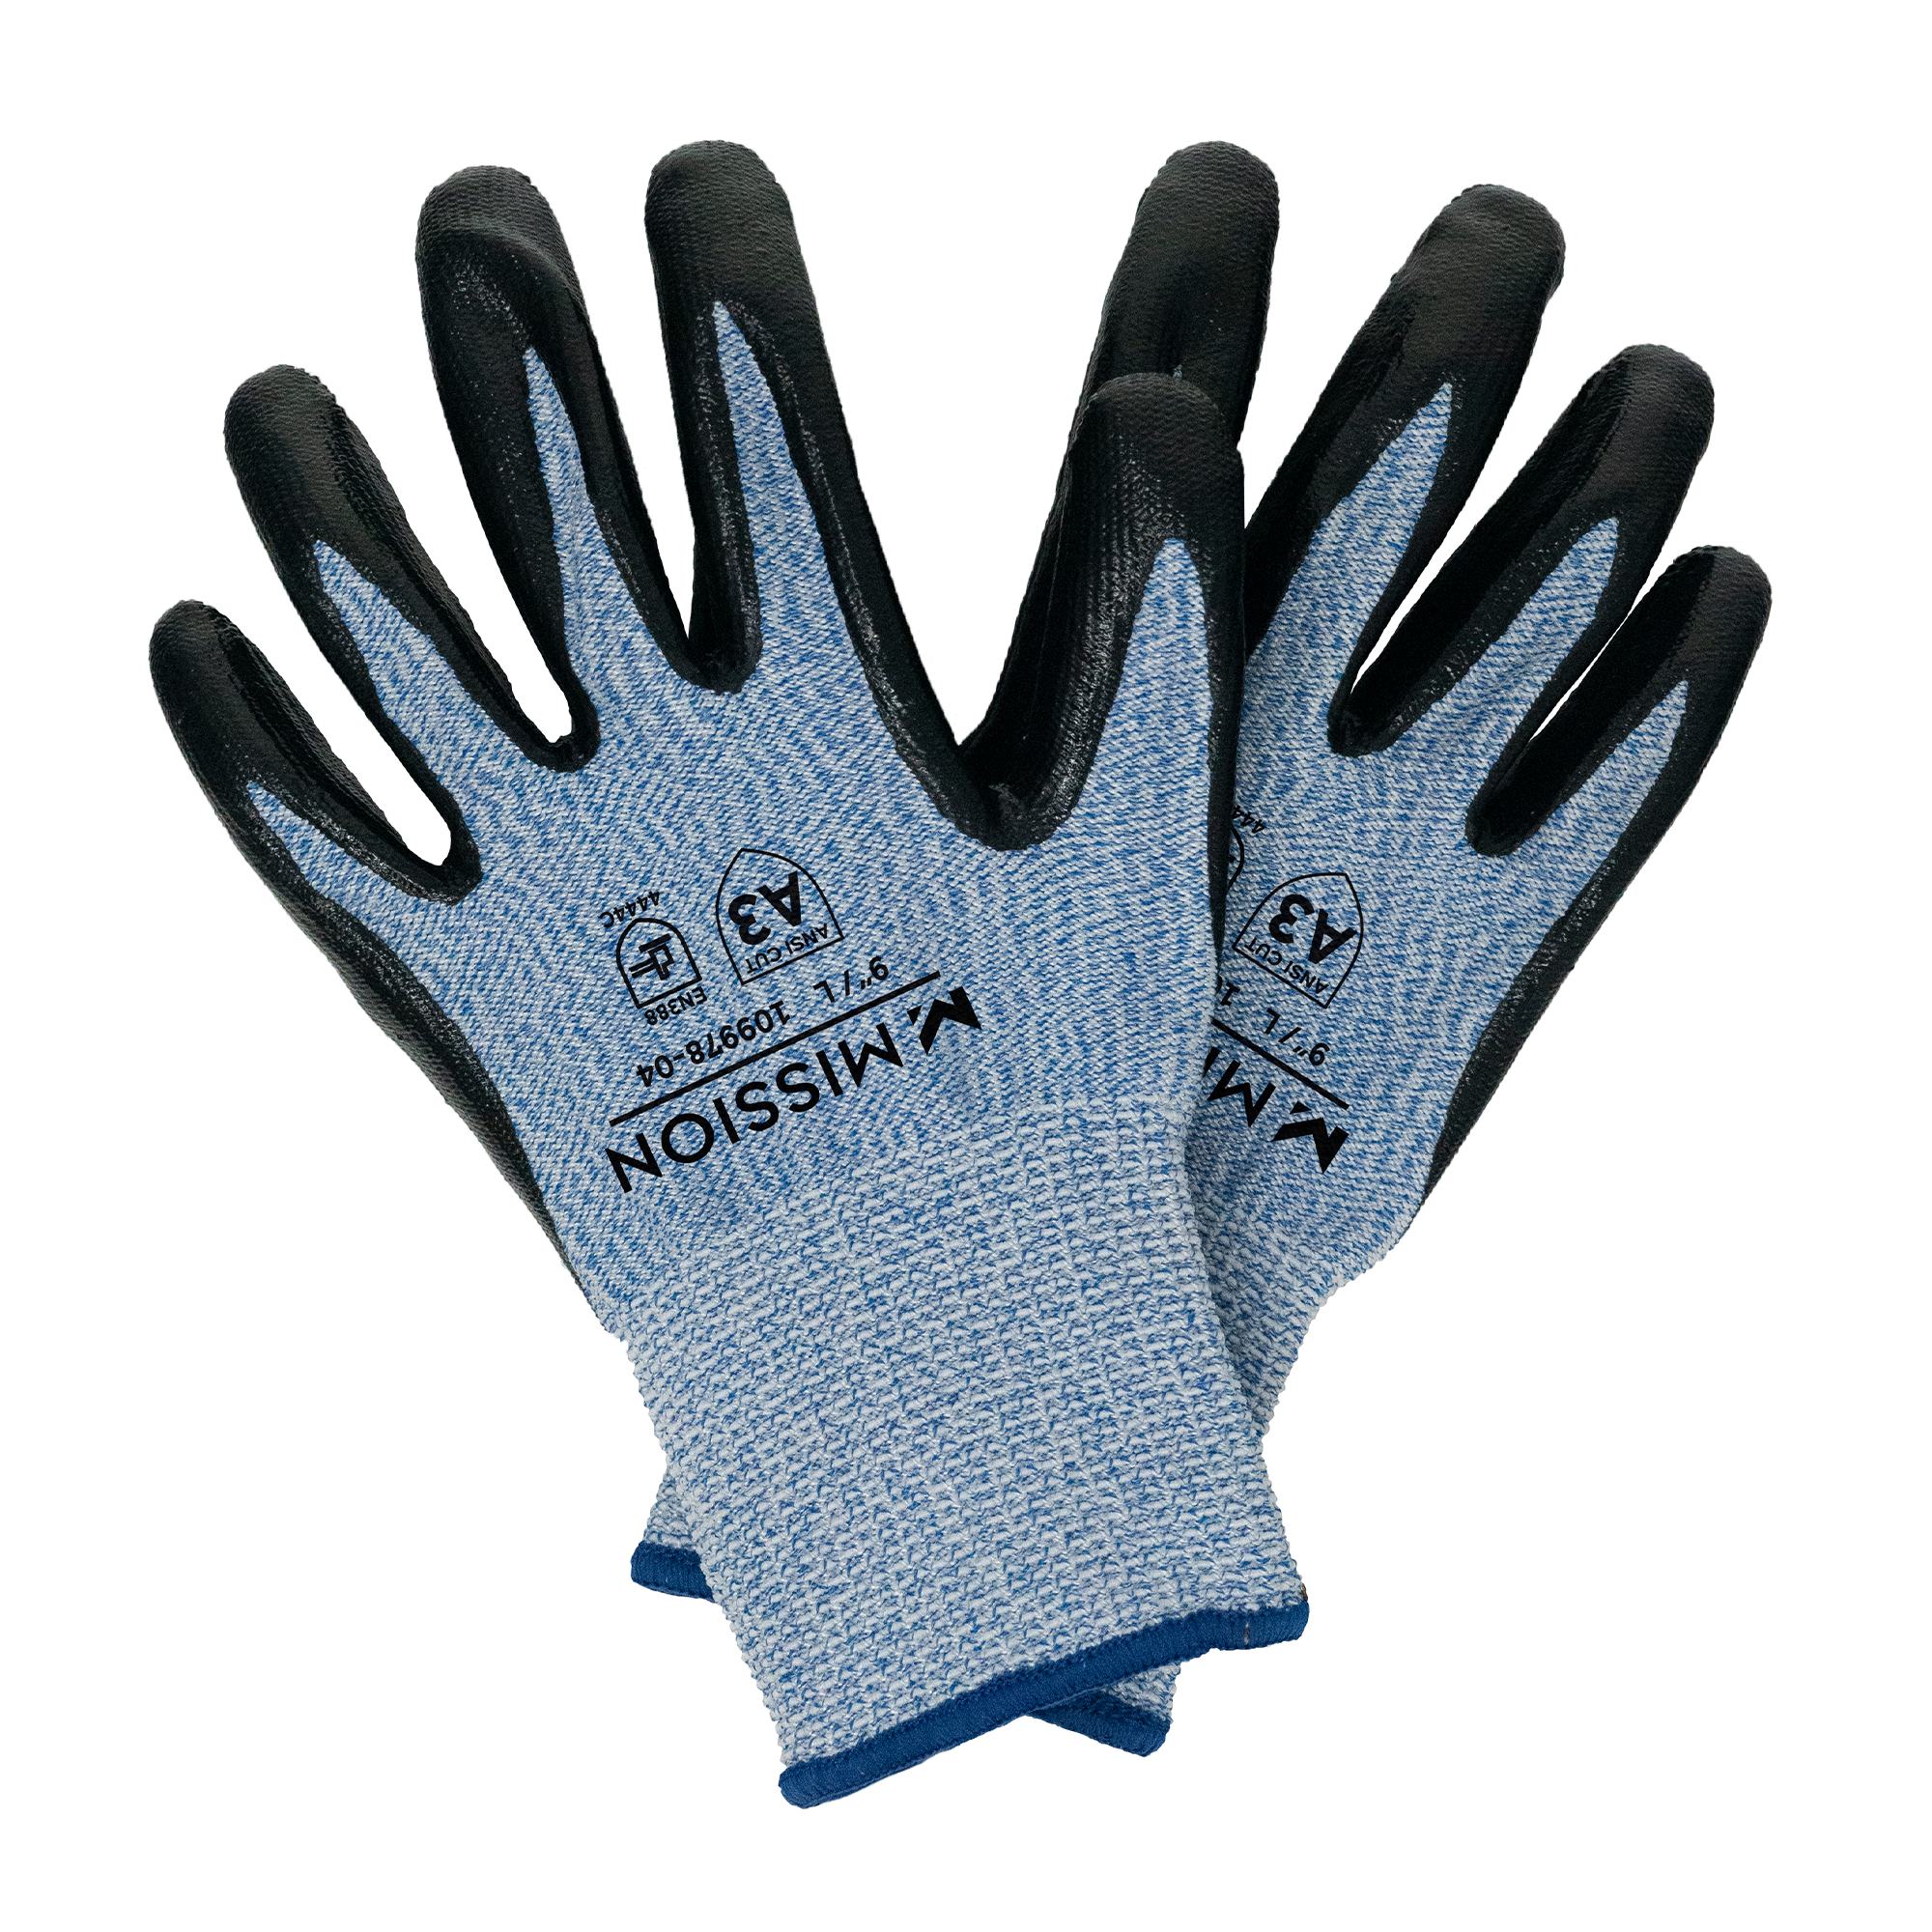 Image of Cool-Tech Work Gloves - 2 Pack